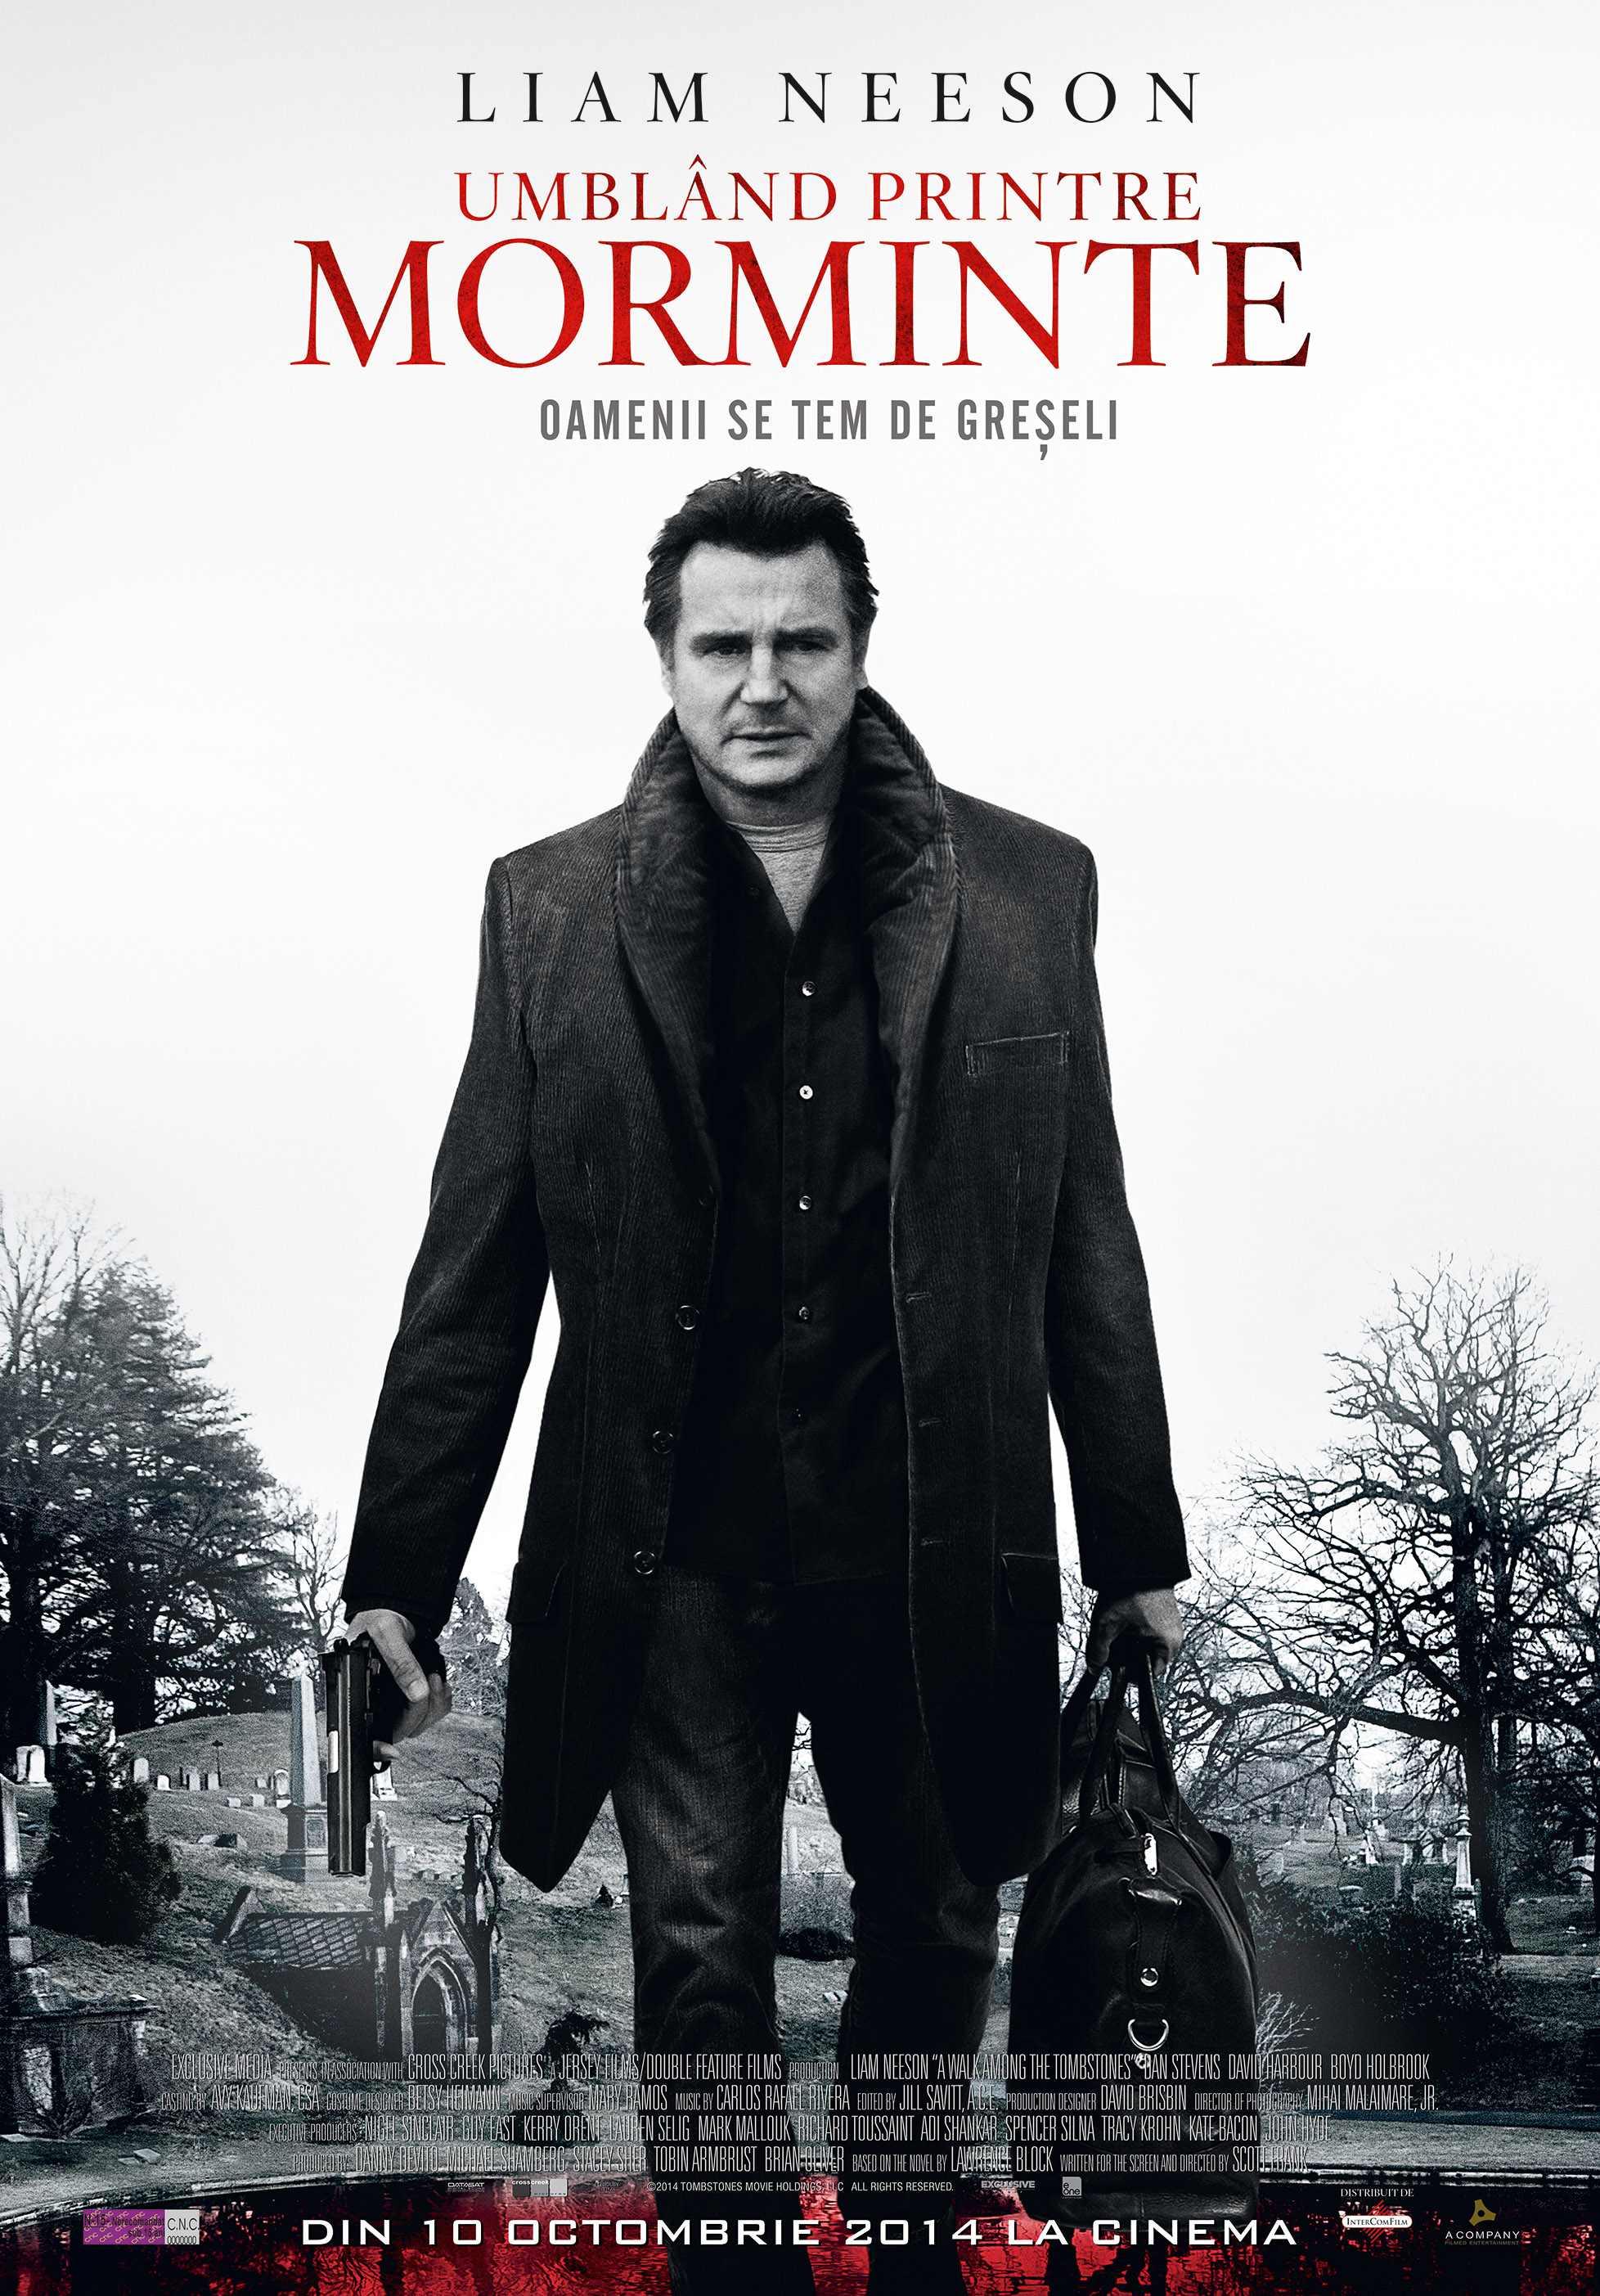 Umbland printre morminte / A Walk Among the Tombstones (Premiera)